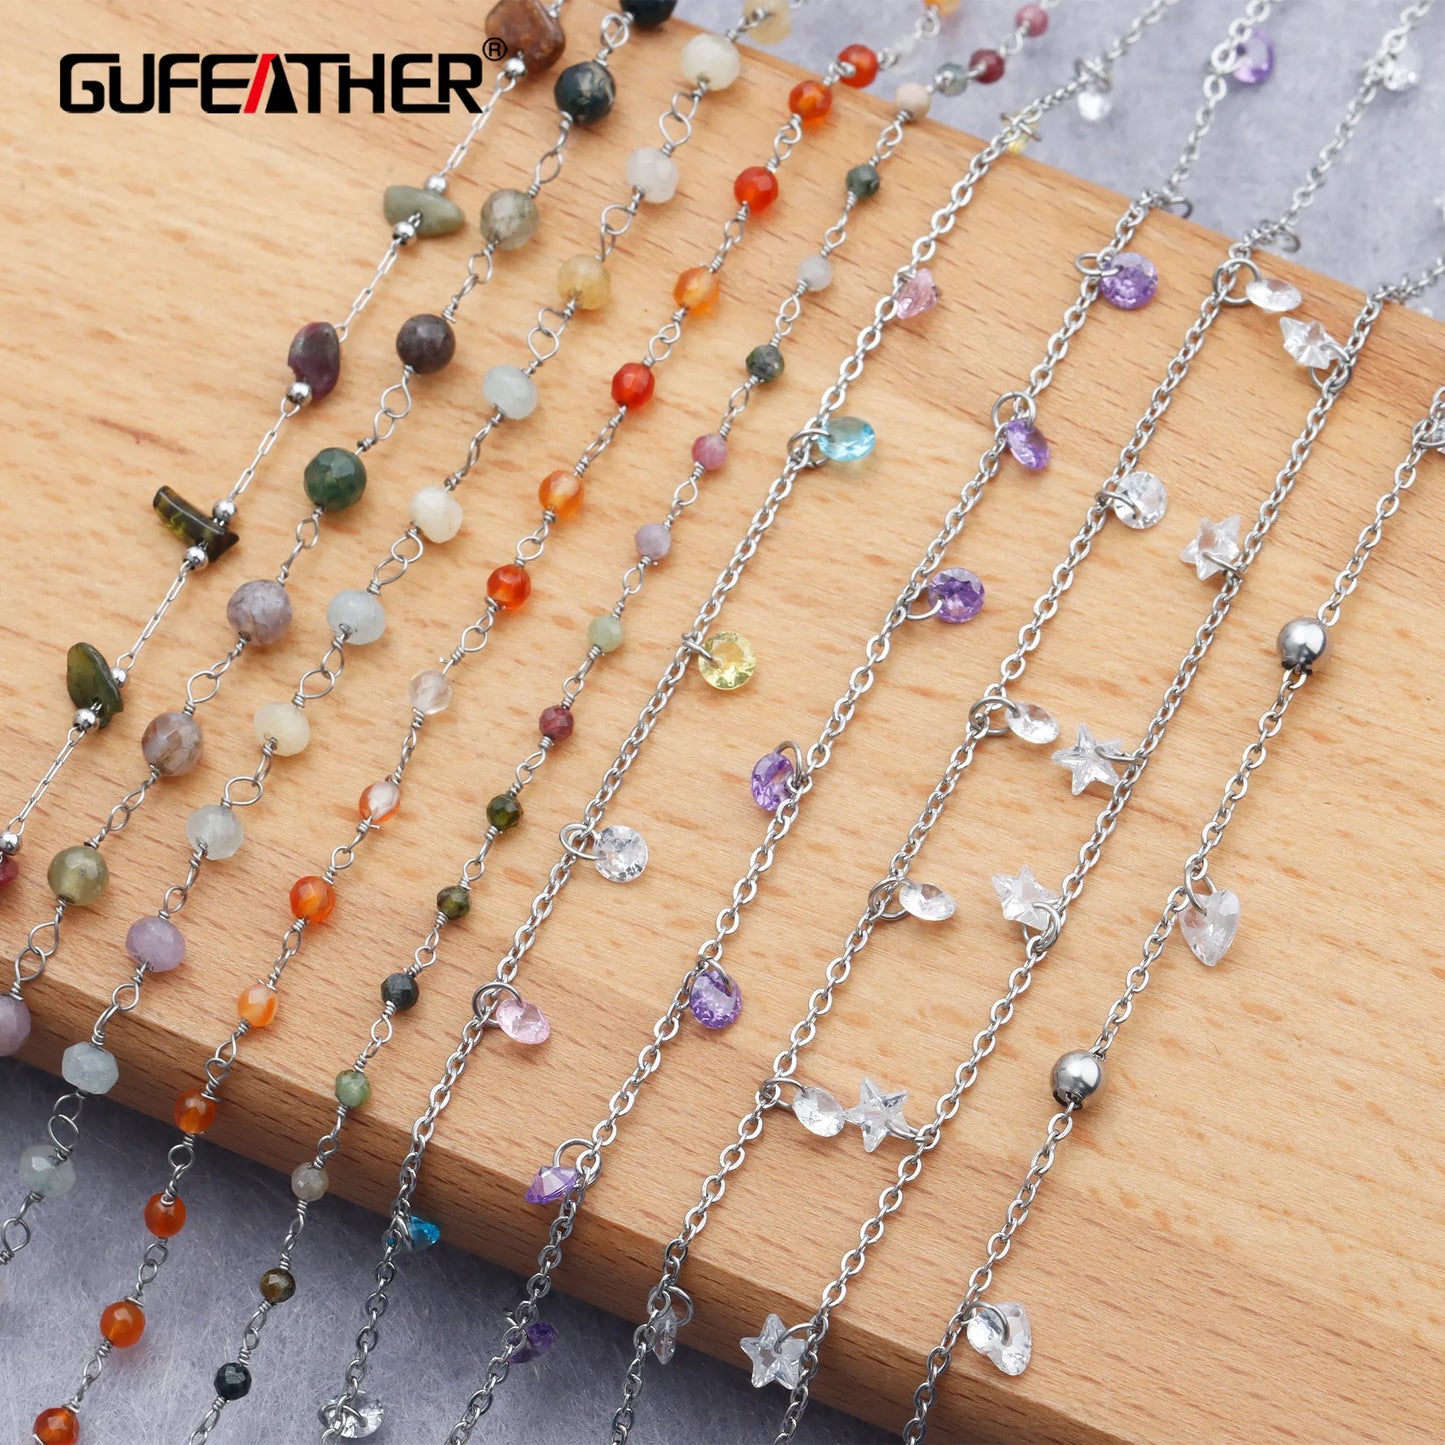 GUFEATHER C147,jewelry accessories,diy chain,stainless steel,natural stone,hand made,diy bracelet necklace,jewelry making,1m/lot